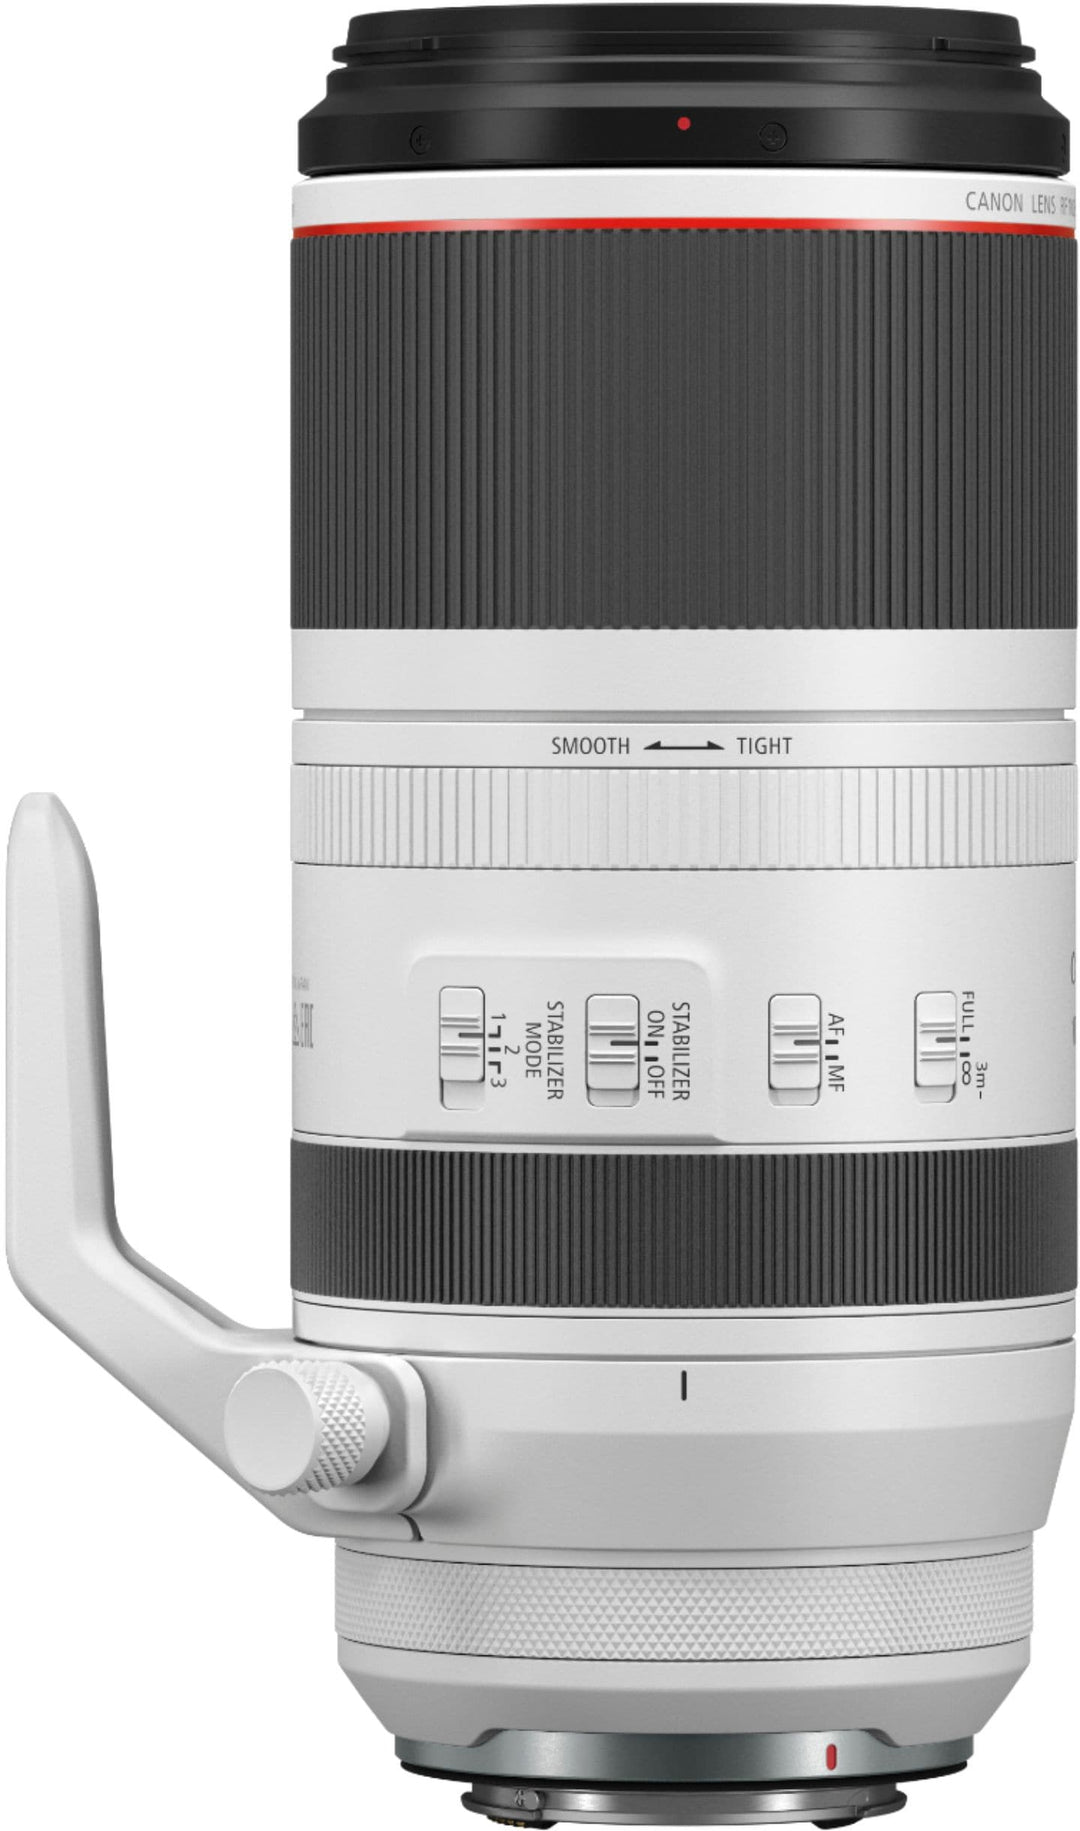 Canon - RF 100-500mm f/4.5-7.1 L IS USM Telephoto Zoom Lens - White_3